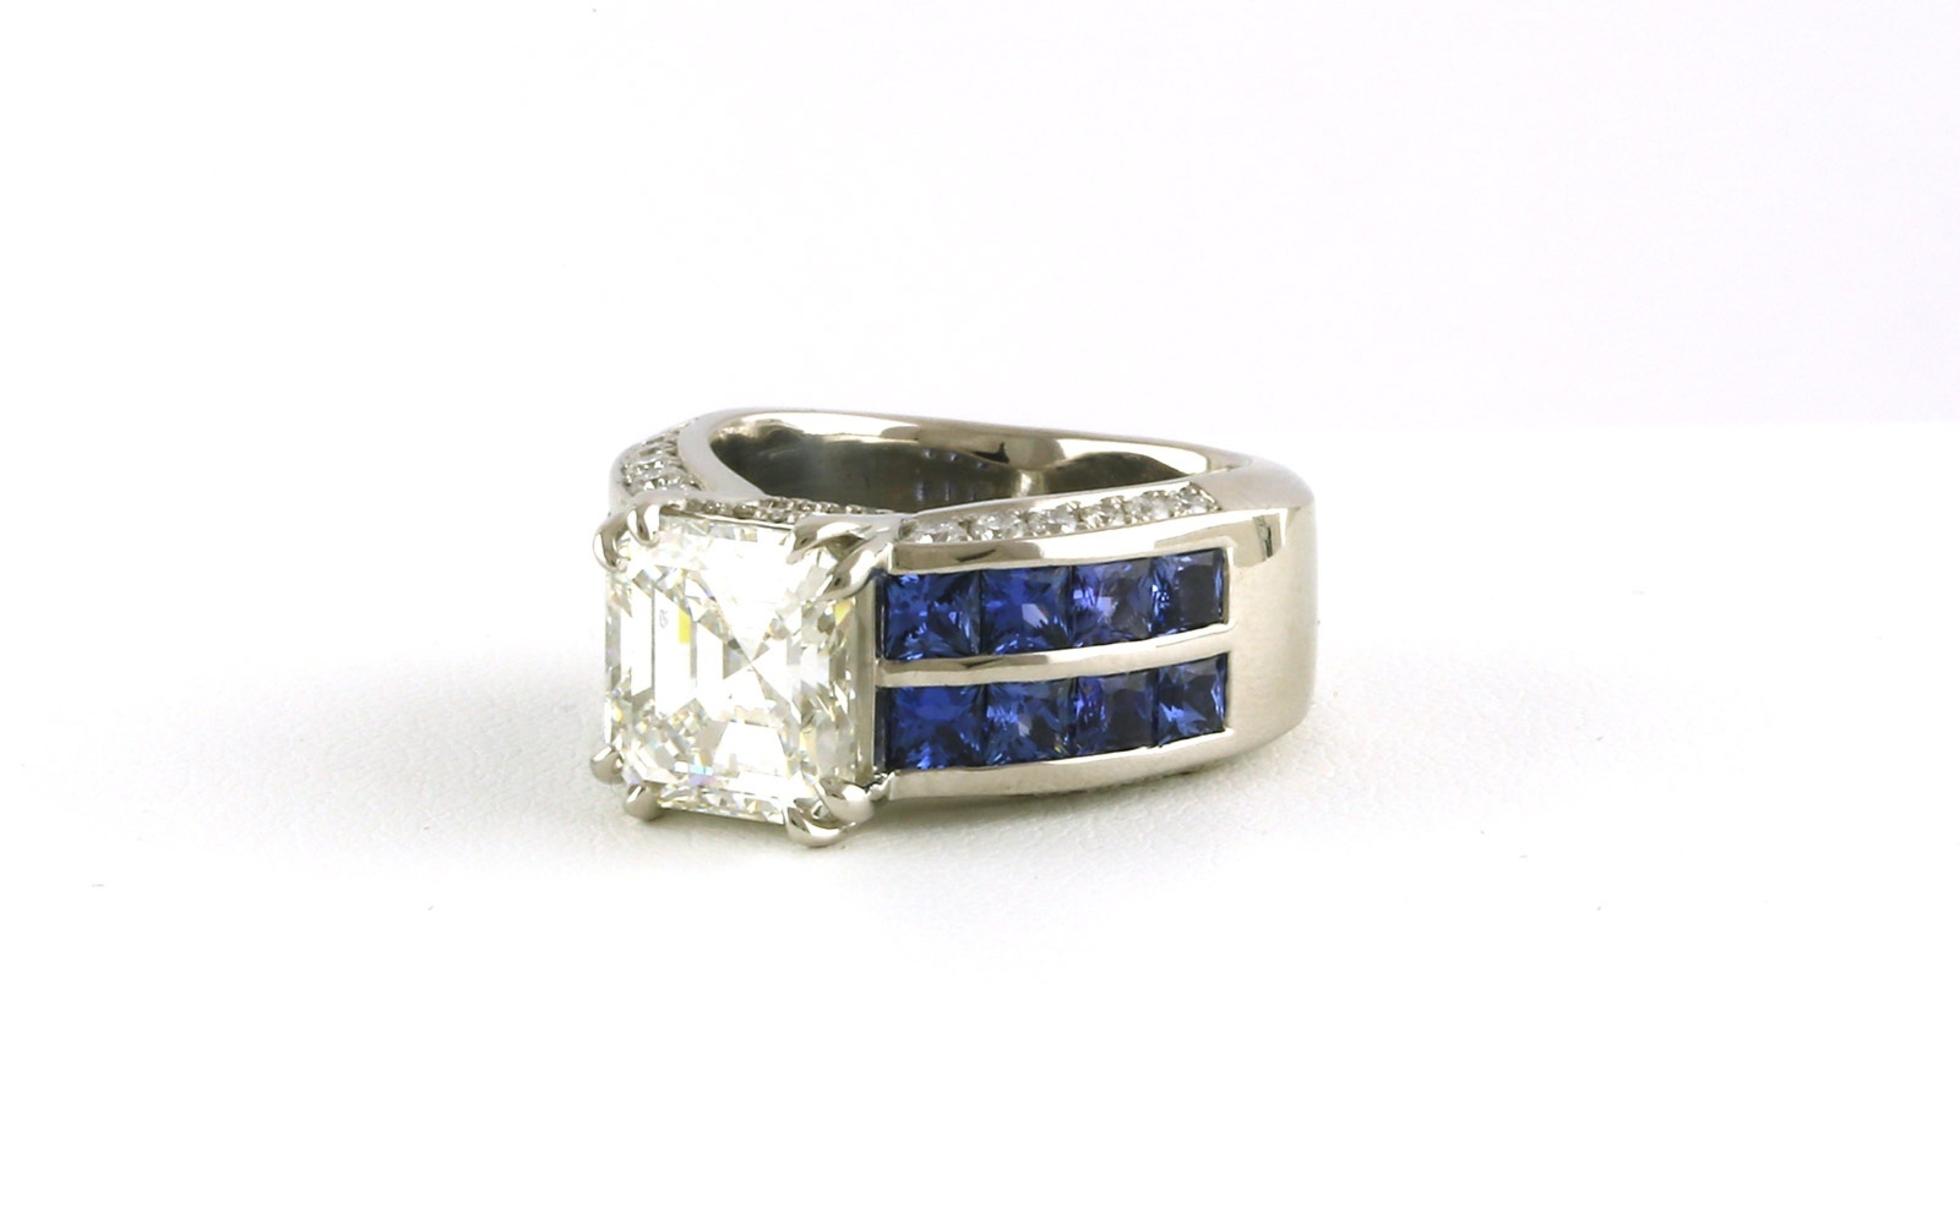 Wide Square Emerald-cut Diamond and 2 Row Channel-set Montana Yogo Sapphire Ring in Platinum (7.89cts TWT) angled